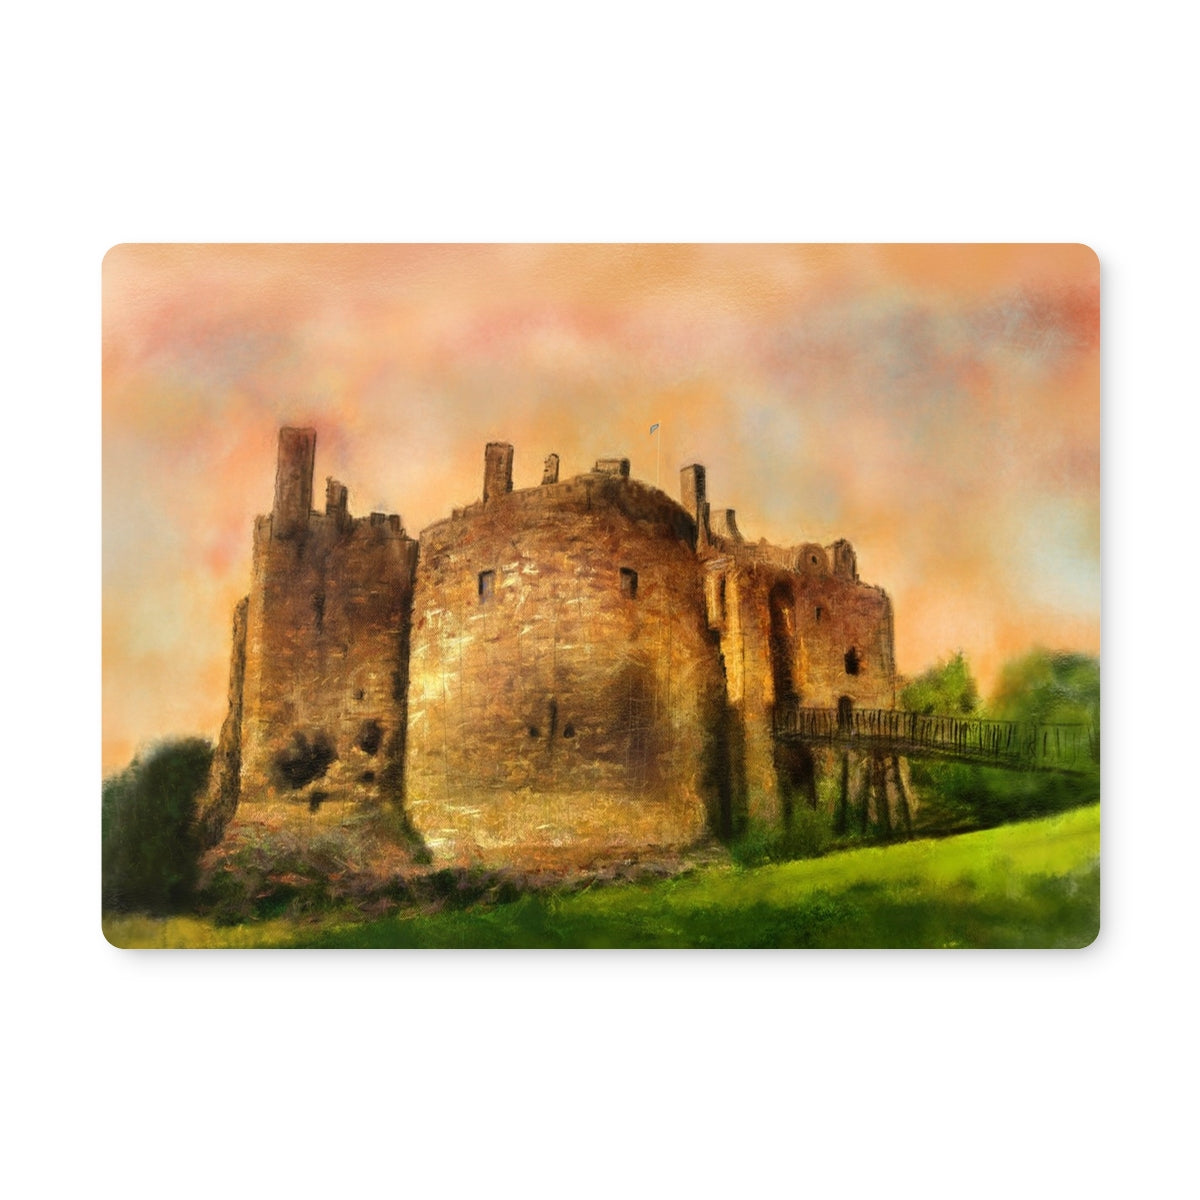 Dirleton Castle Art Gifts Placemat-Homeware-Prodigi-4 Placemats-Paintings, Prints, Homeware, Art Gifts From Scotland By Scottish Artist Kevin Hunter